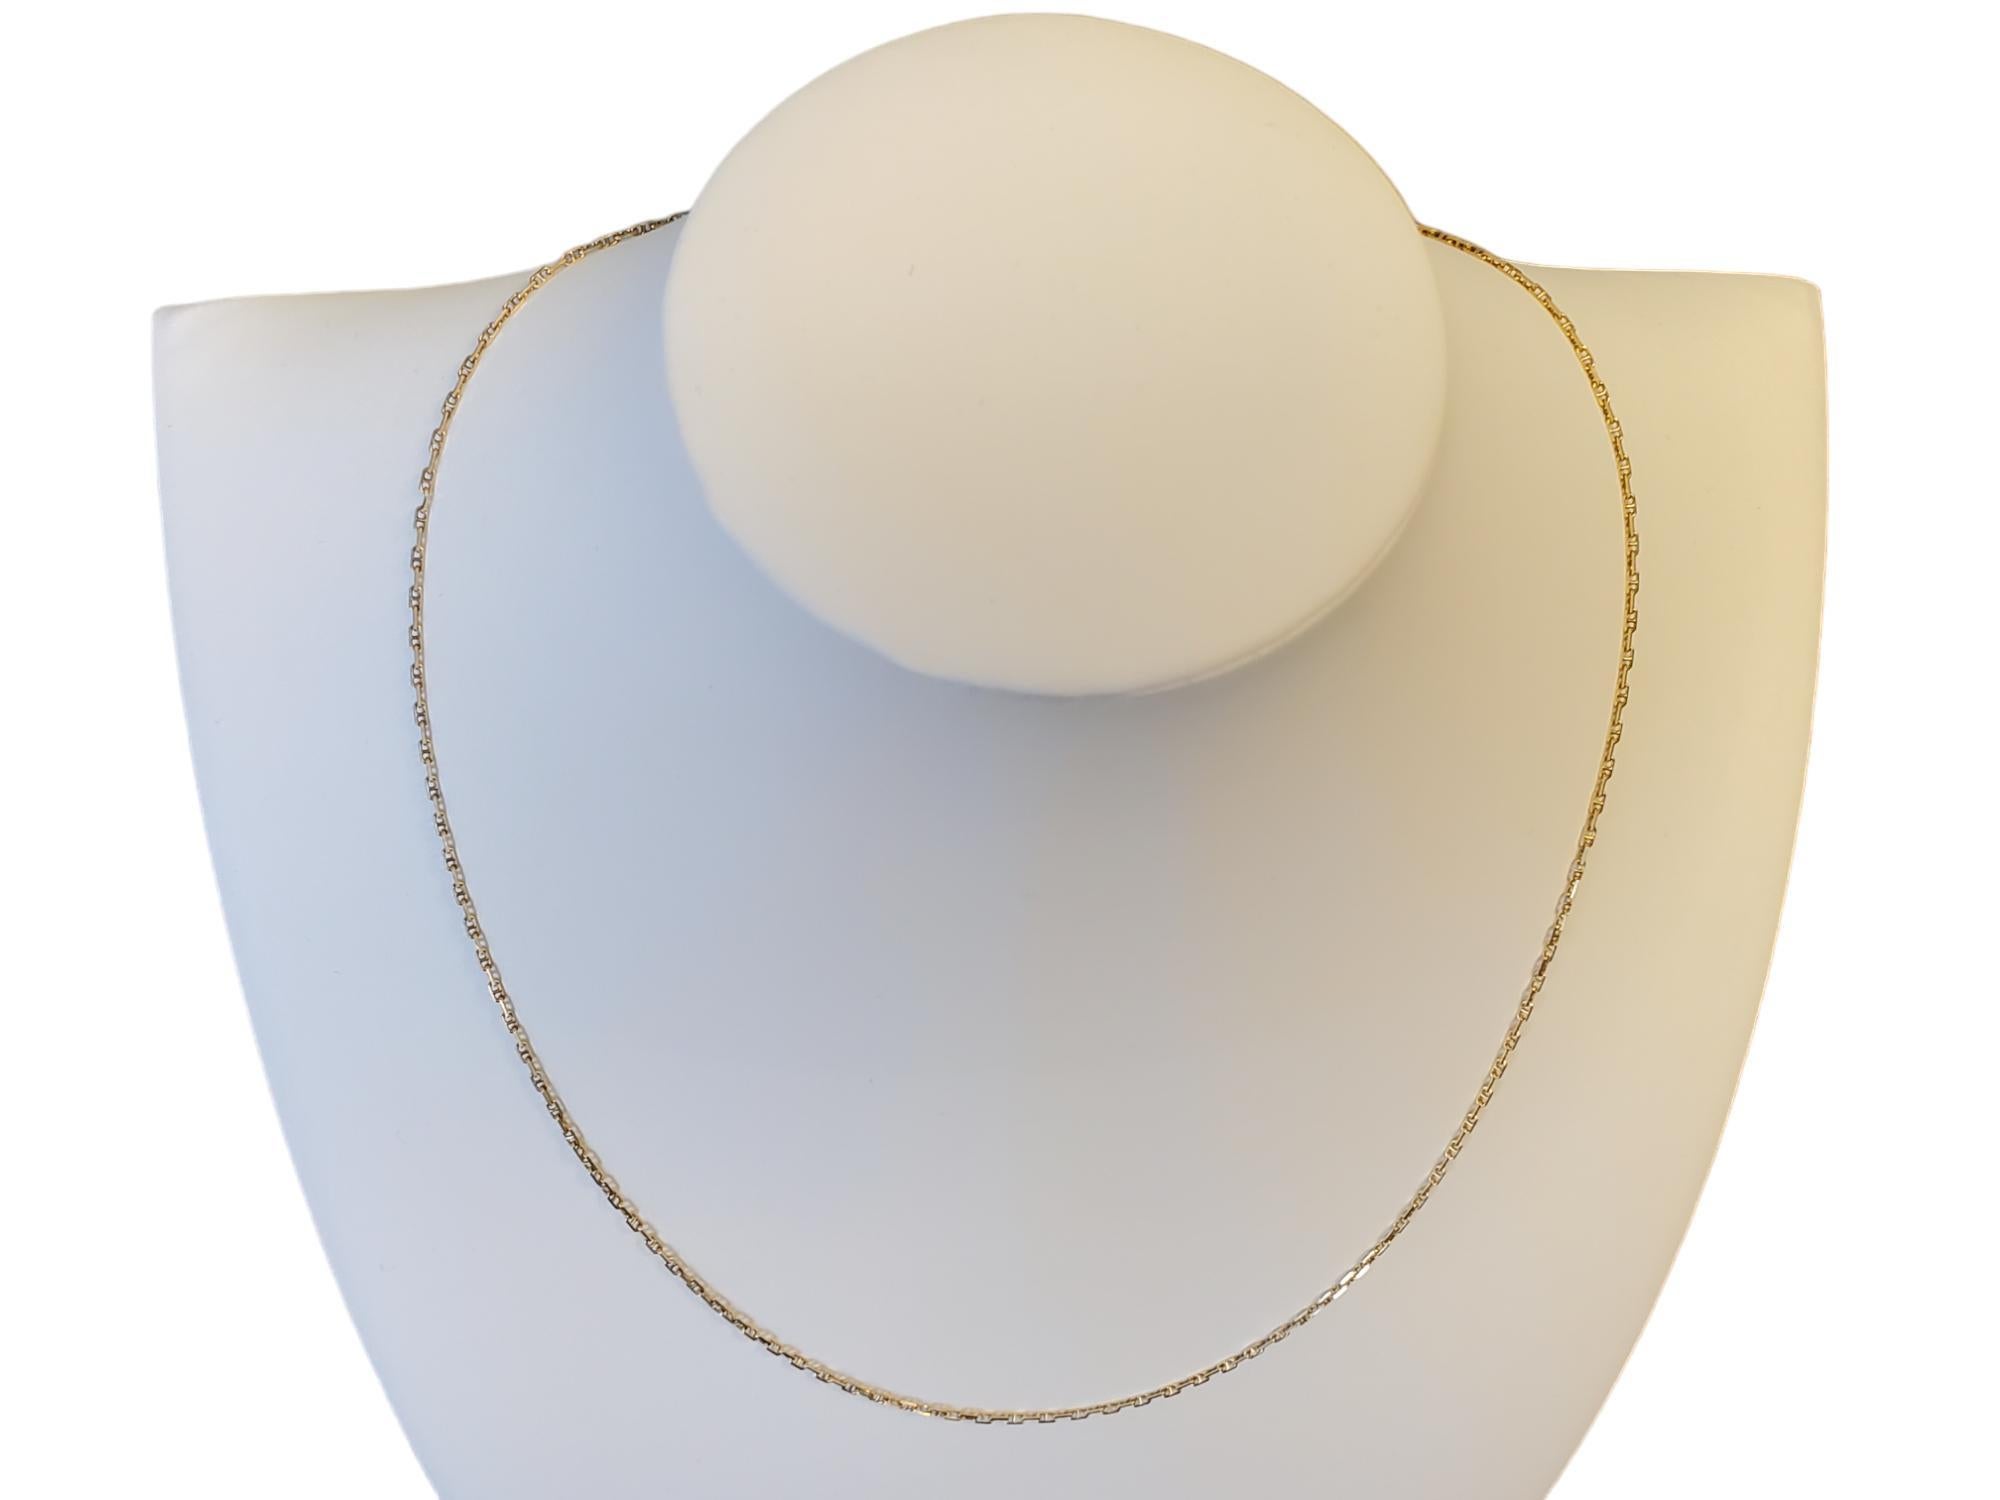 Vintage Italian Stamped 14k Yellow Gold Link Chain

Listed is a beautiful vintage 14k stamped yellow gold link pattern necklace. Each link has a bar in the center of it, its almost like a paperclip chain with a bar through each one. Its a very cool